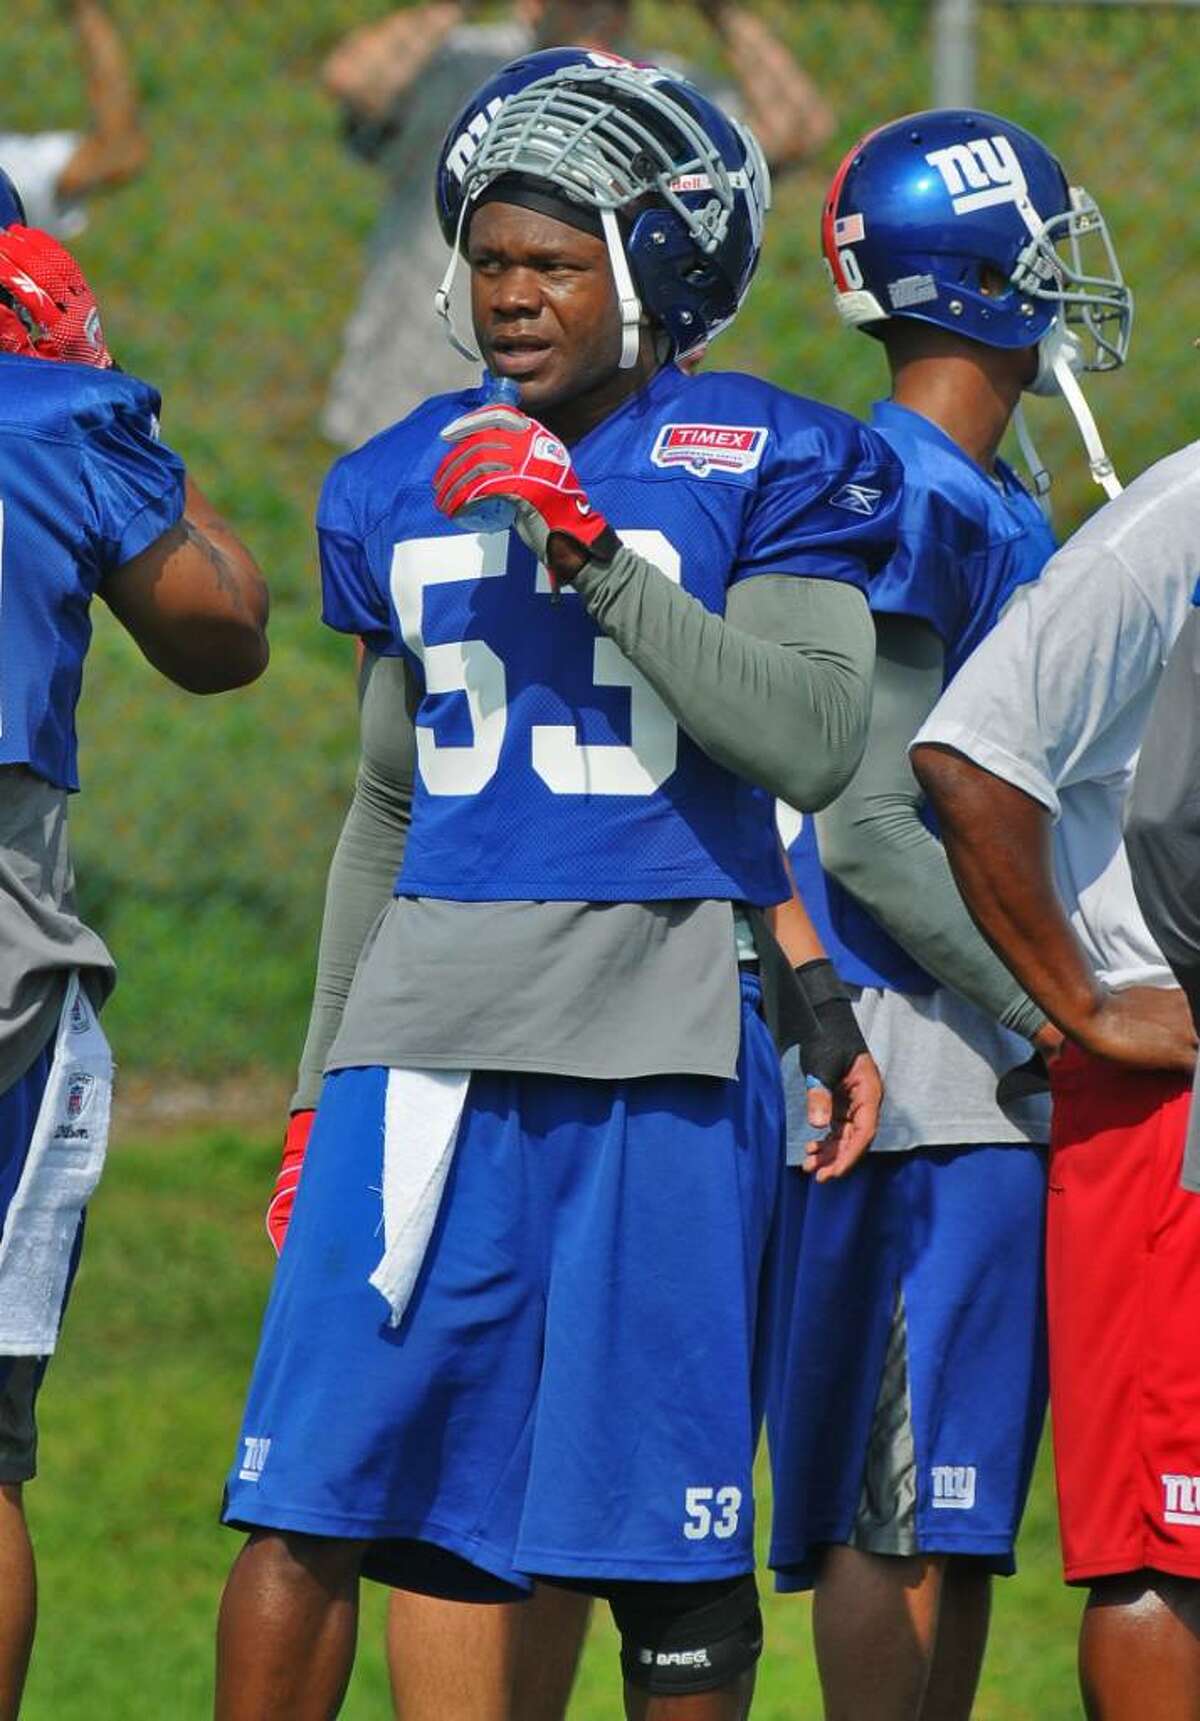 New York Giants linebacker Keith Bulluck on the first day of training camp at UAlbany. (Philip Kamrass / Times Union)